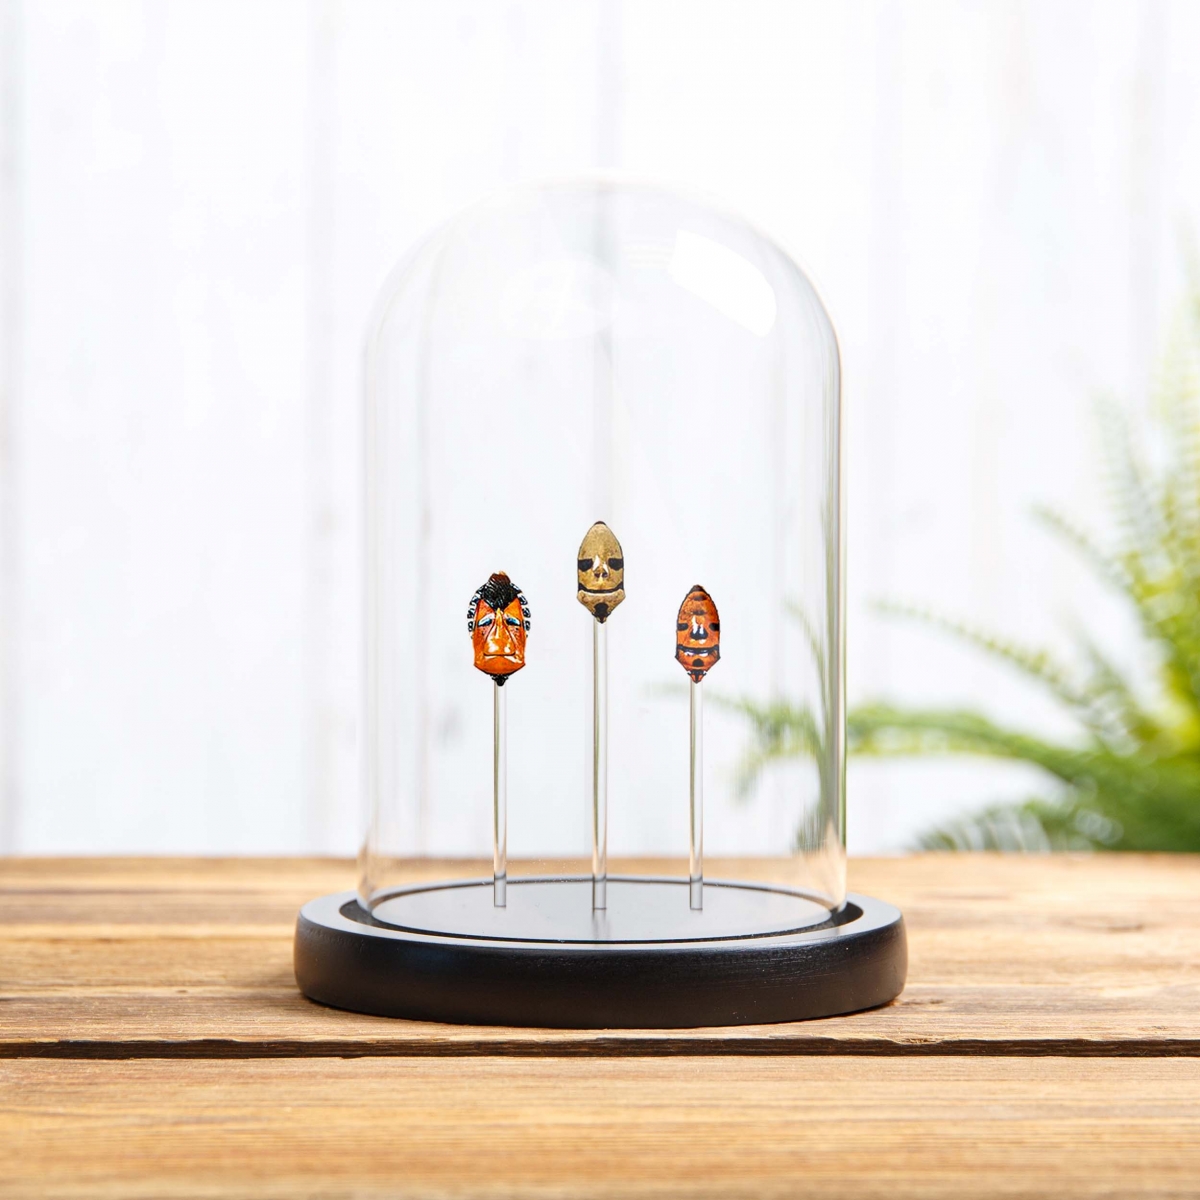 Minibeast Man-Face Shield Bug Trio in Glass Dome with Wooden Base